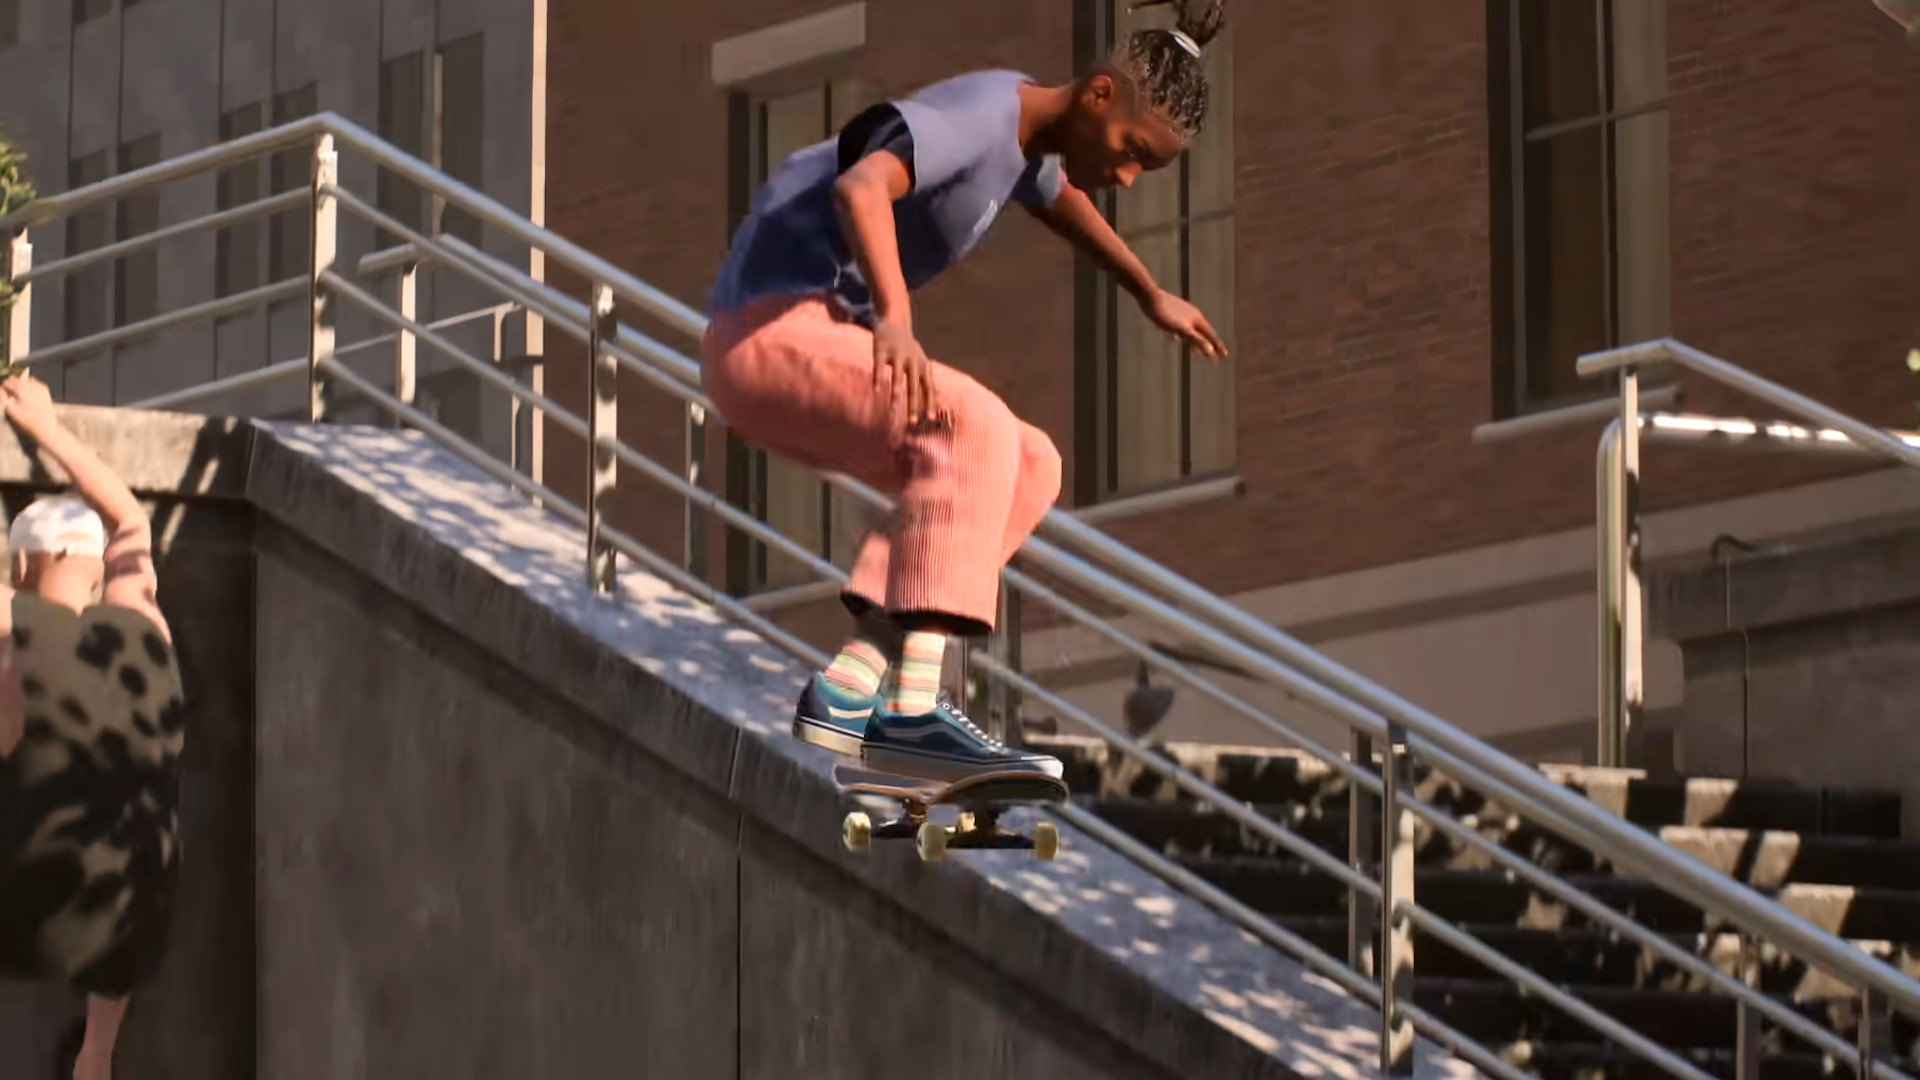 Early alpha build of Skate 4 leaks, EA tells fans to not download it